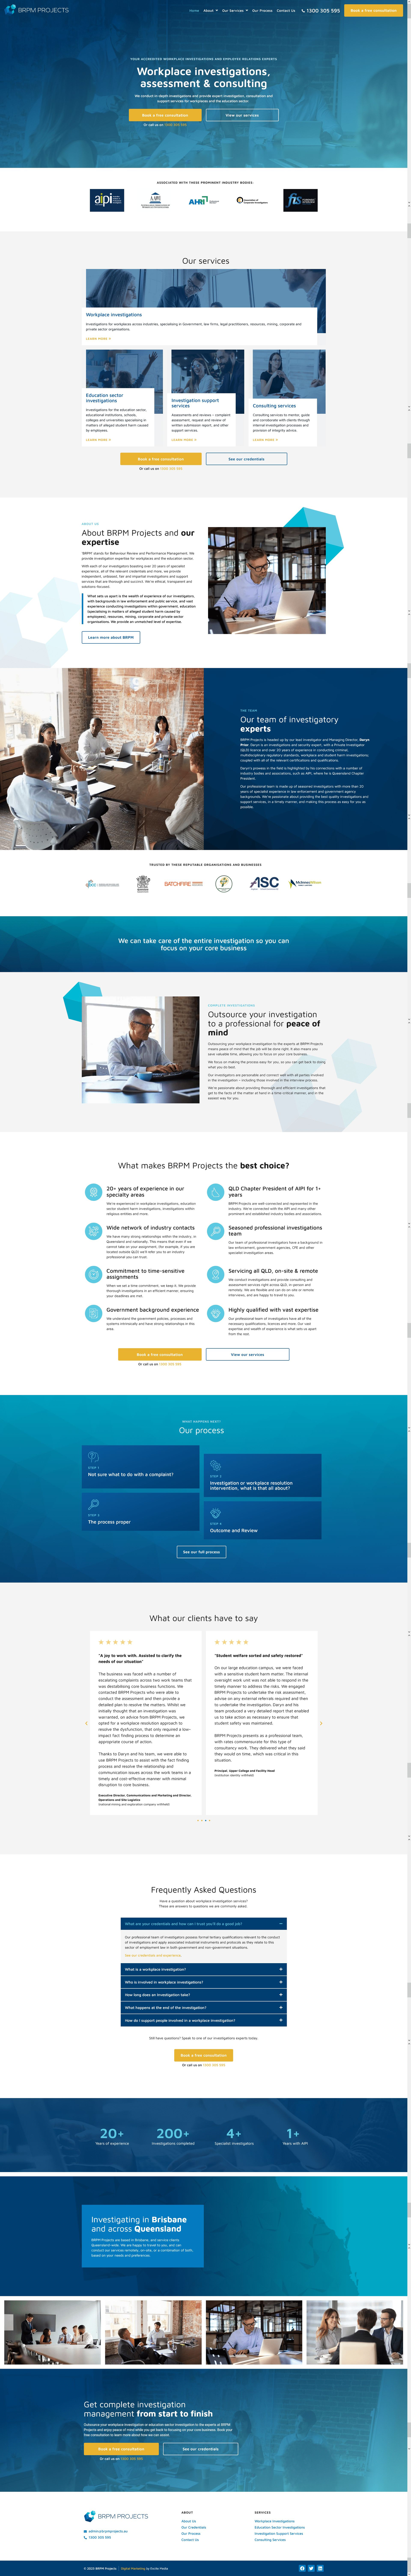 BRPM Projects homepage design